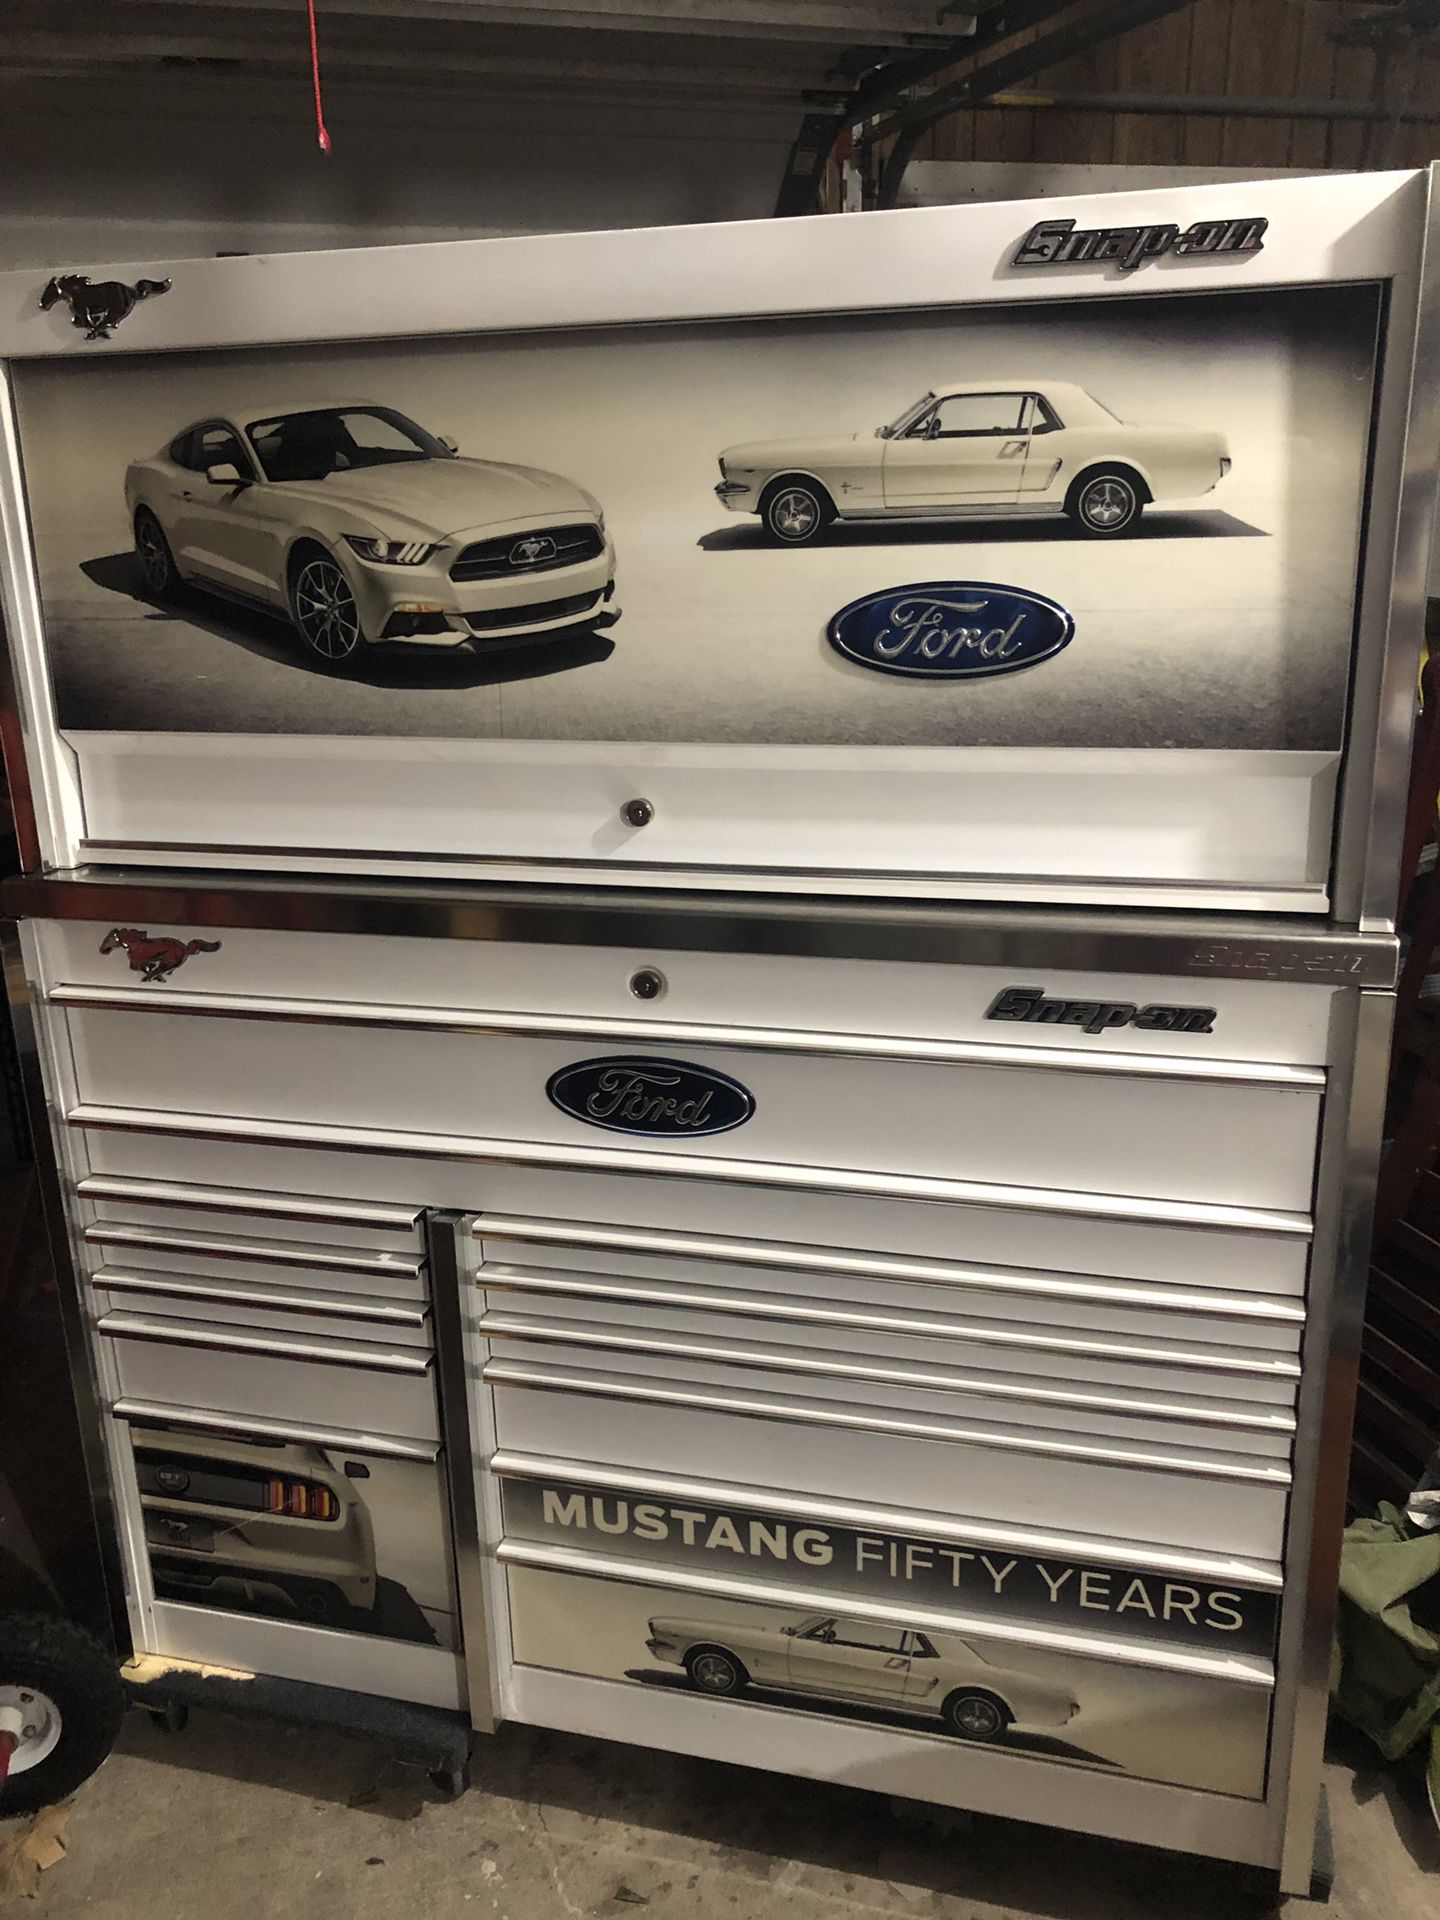 Limited Edition Snap On tool box